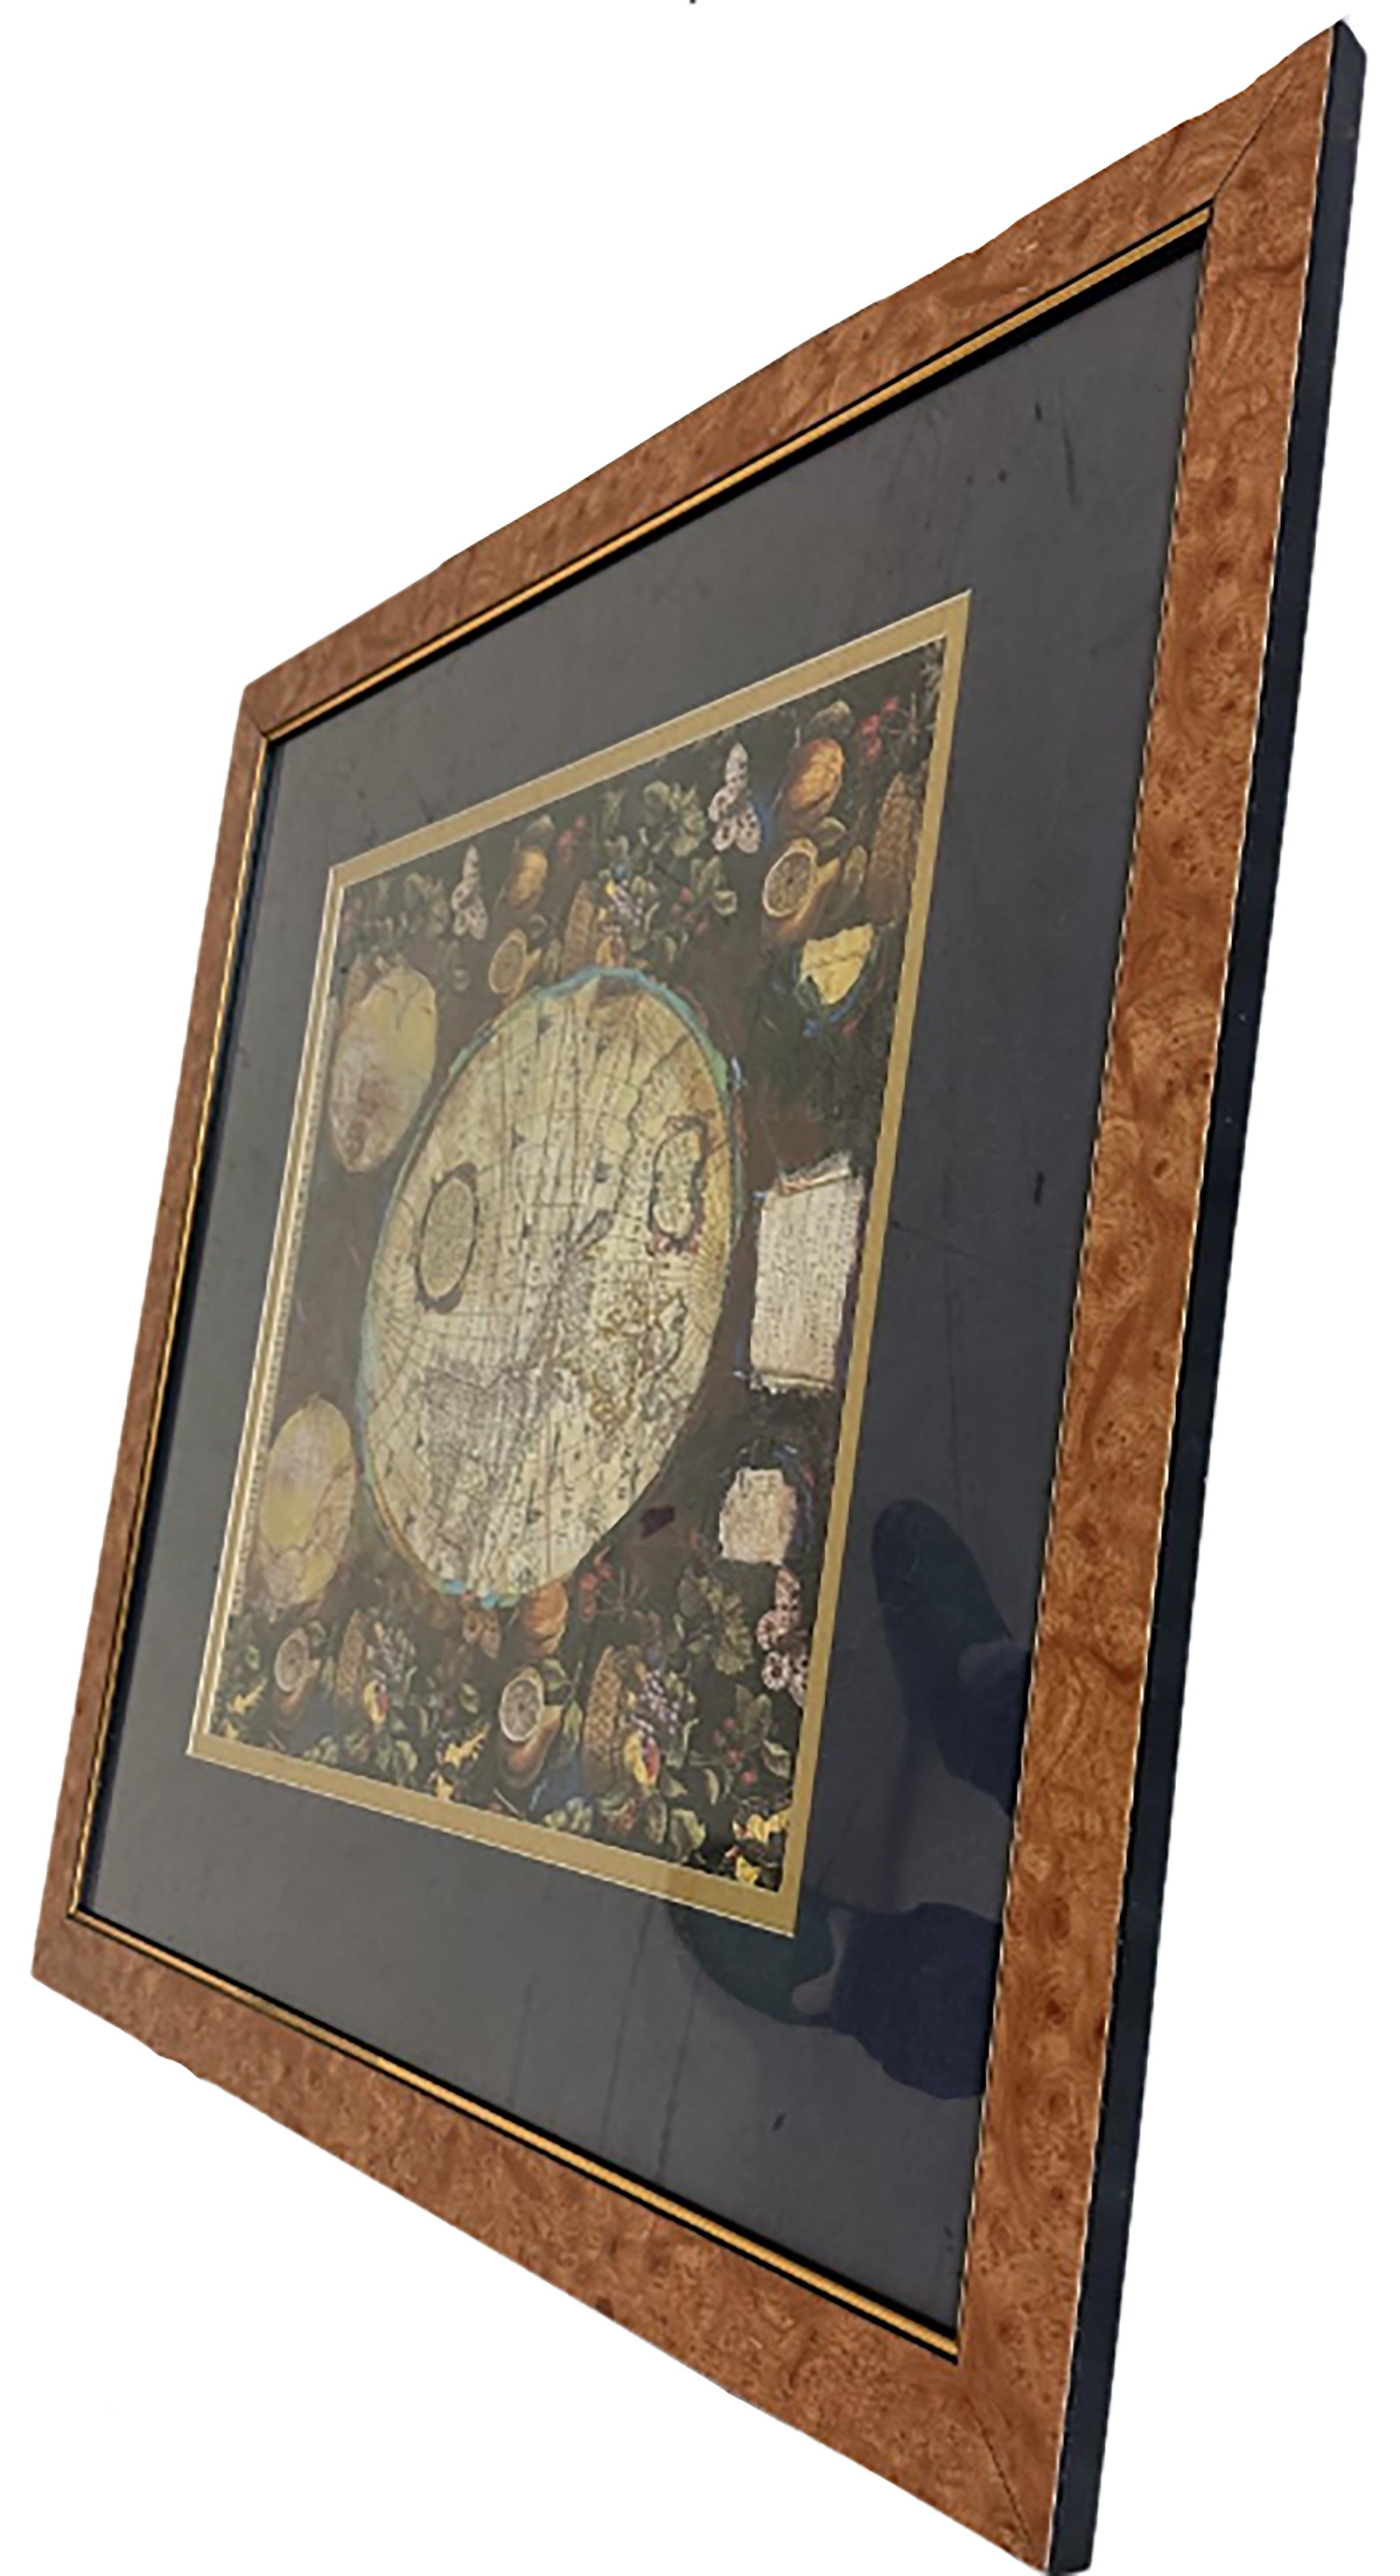 A pair of prints depicting antique world maps framed in burl wood. One picture contains a depiction of Africa, Europe, and Oceania. The other picture is of North and South America. Touches of paint have been used to add some interest and artistic